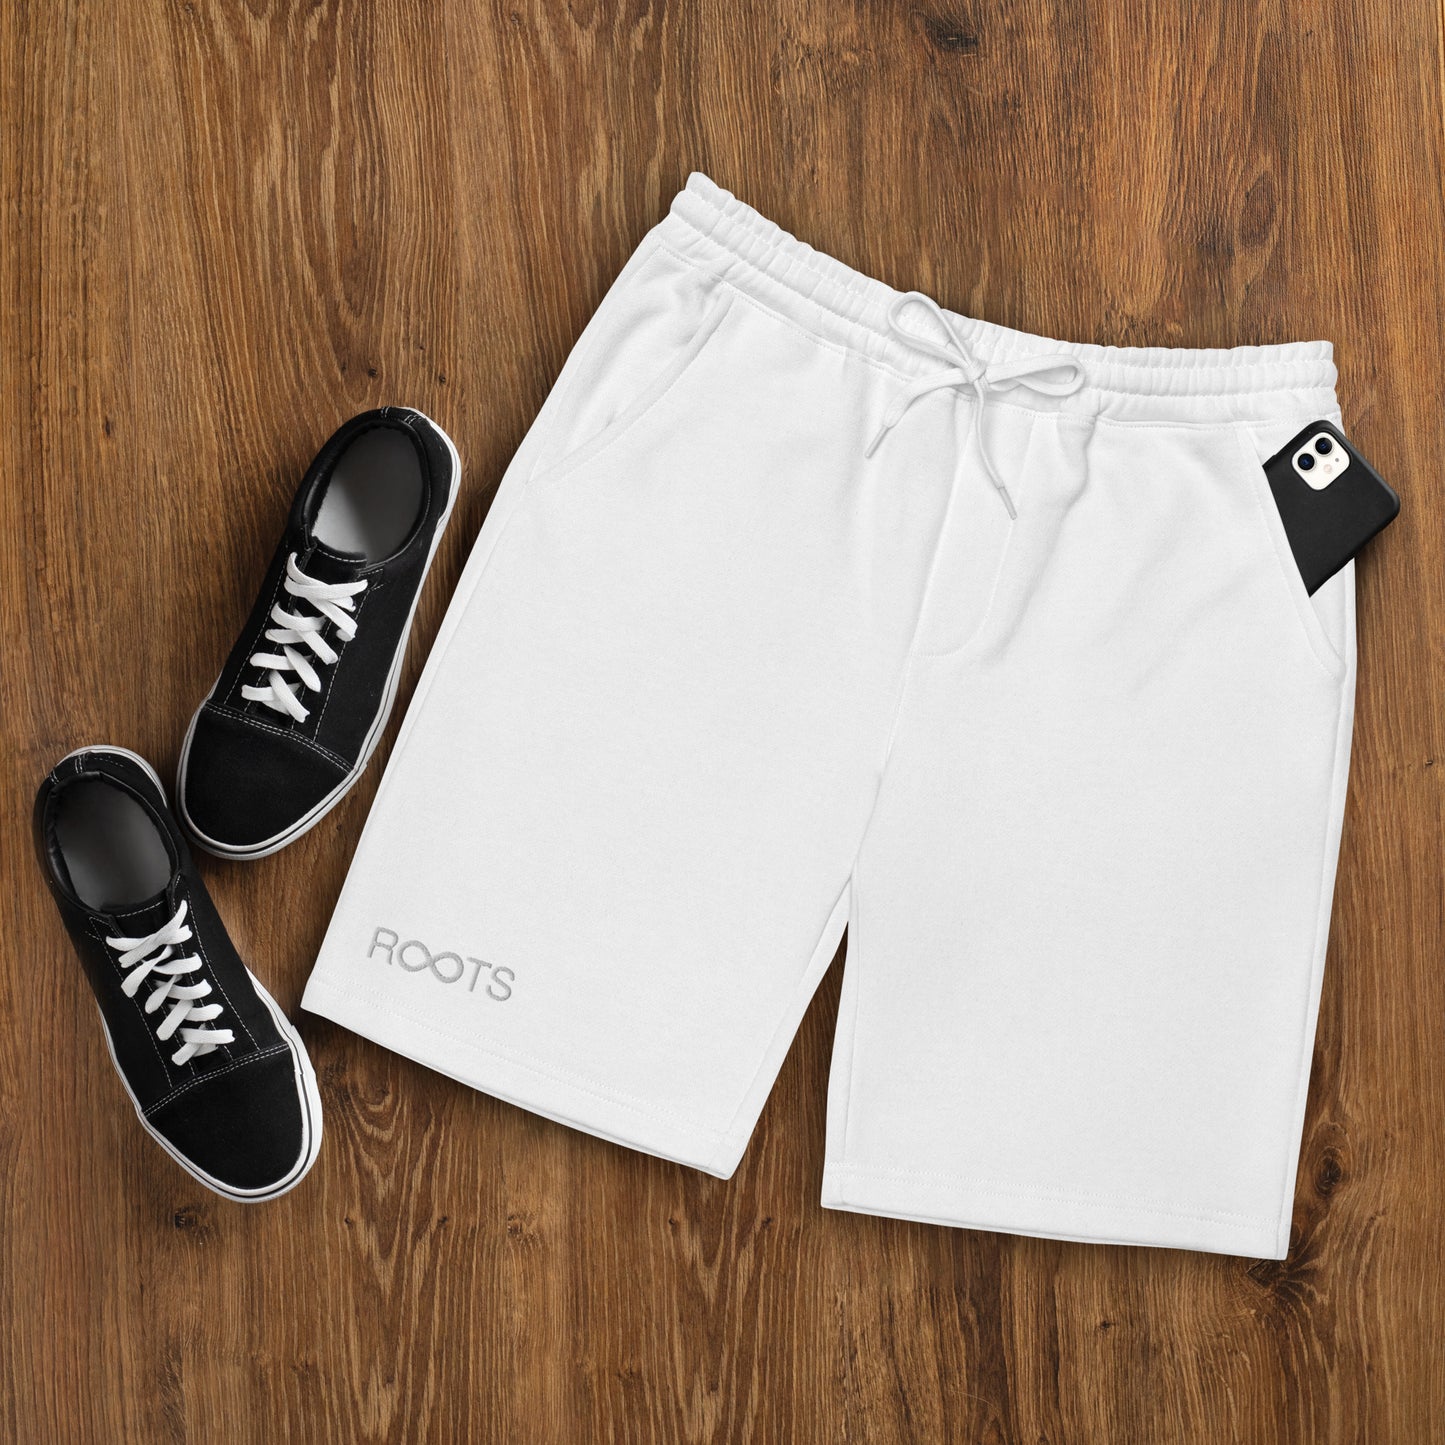 Roots Are Forever Men's fleece shorts